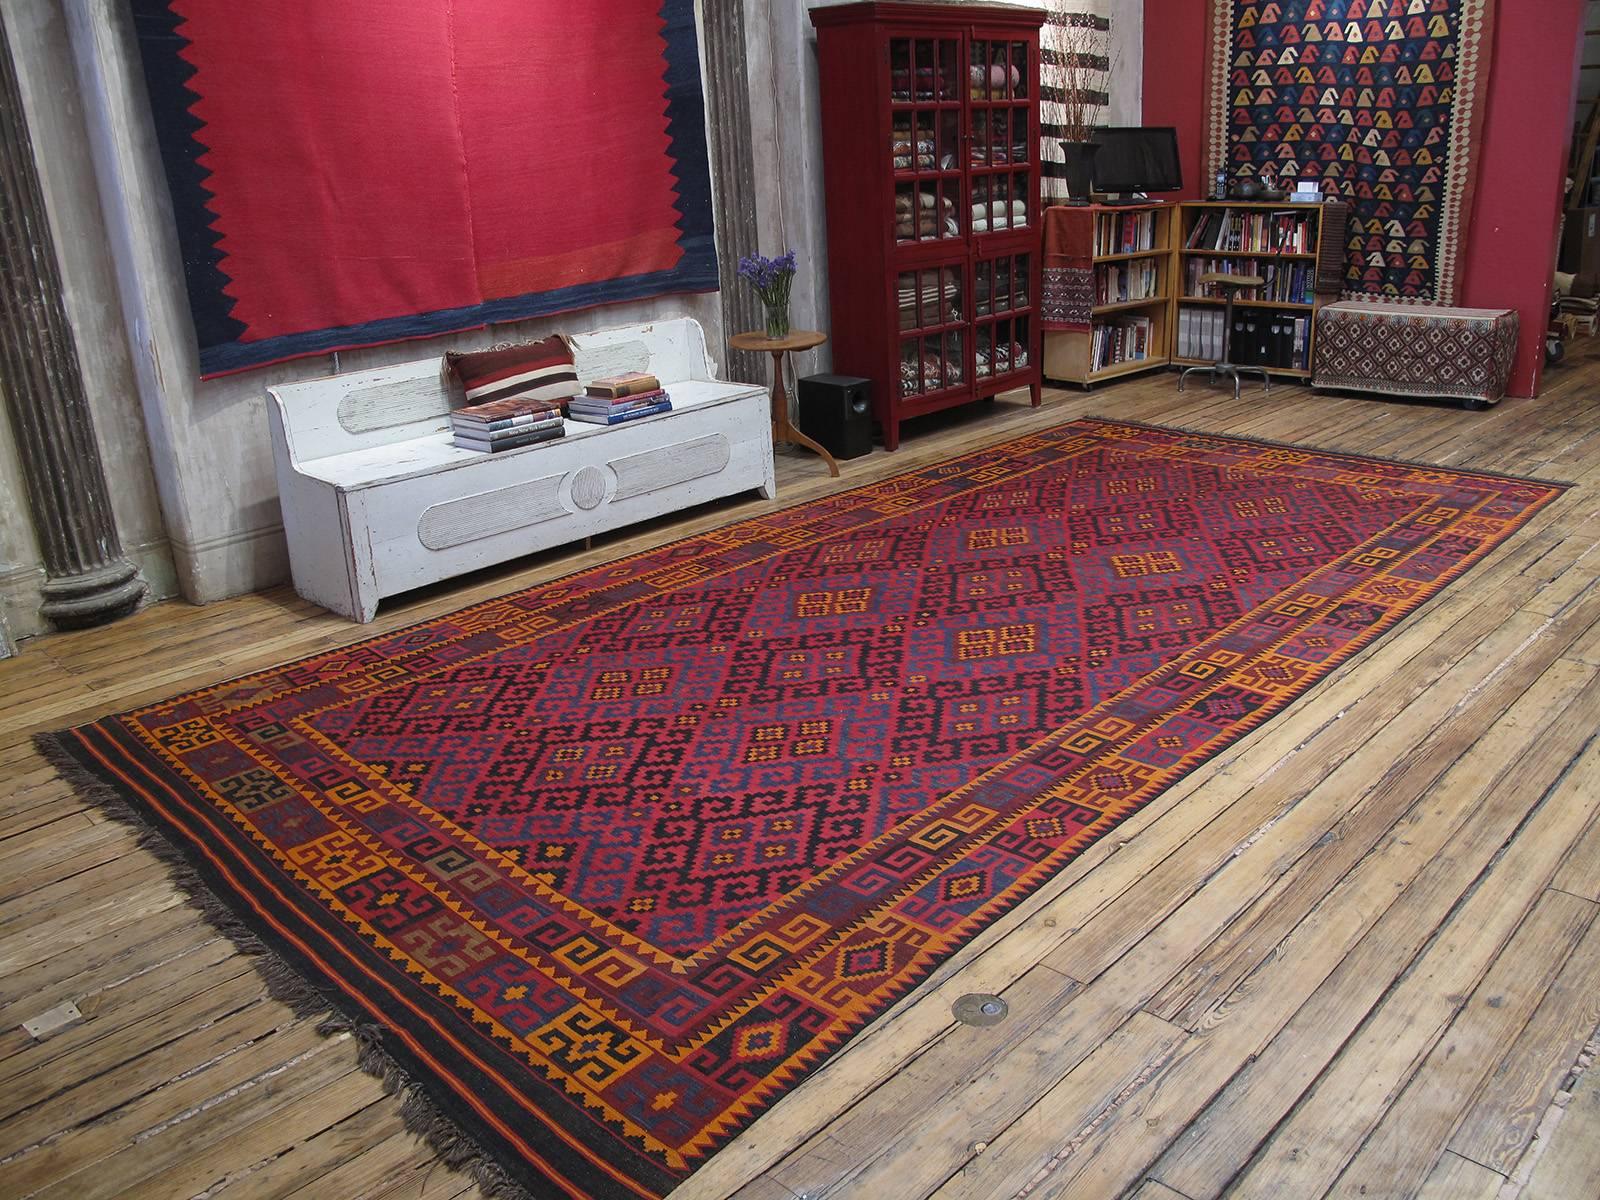 A large, brightly colored tribal kilim from Northern Afghanistan - a very high quality example.